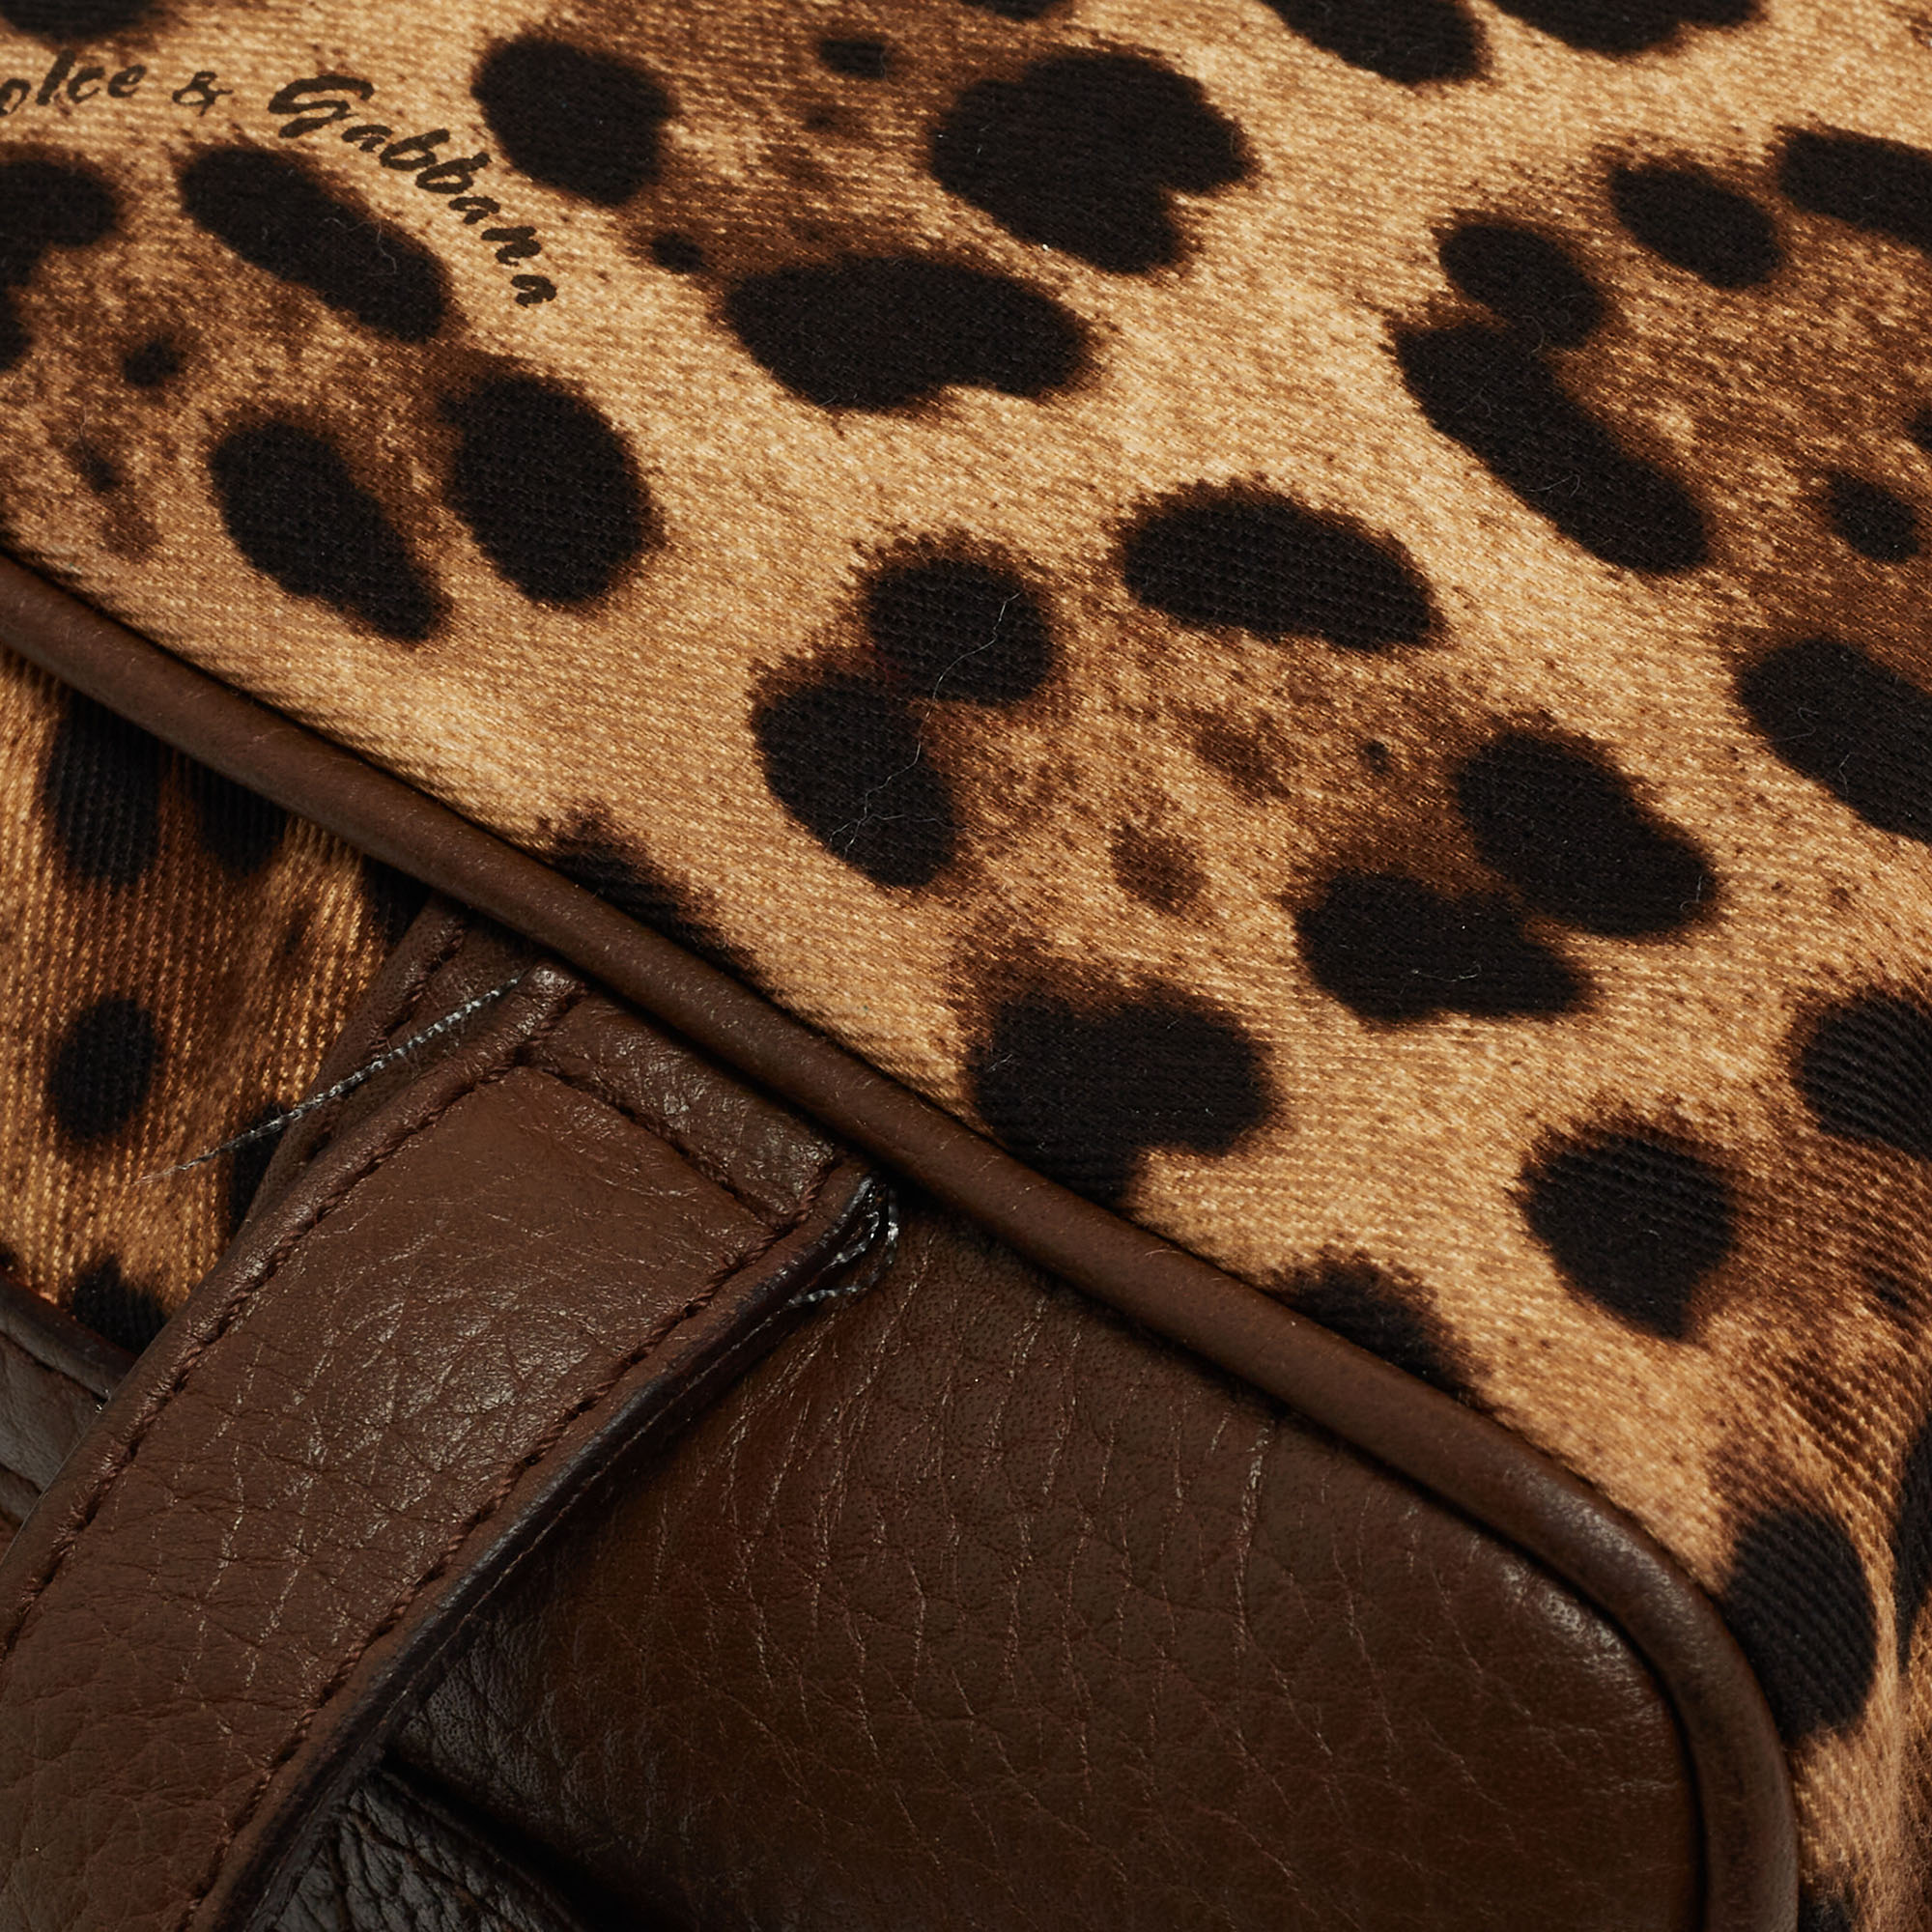 Dolce & Gabbana Brown Leopard Print Fabric And Leather Cosmetic Pouch